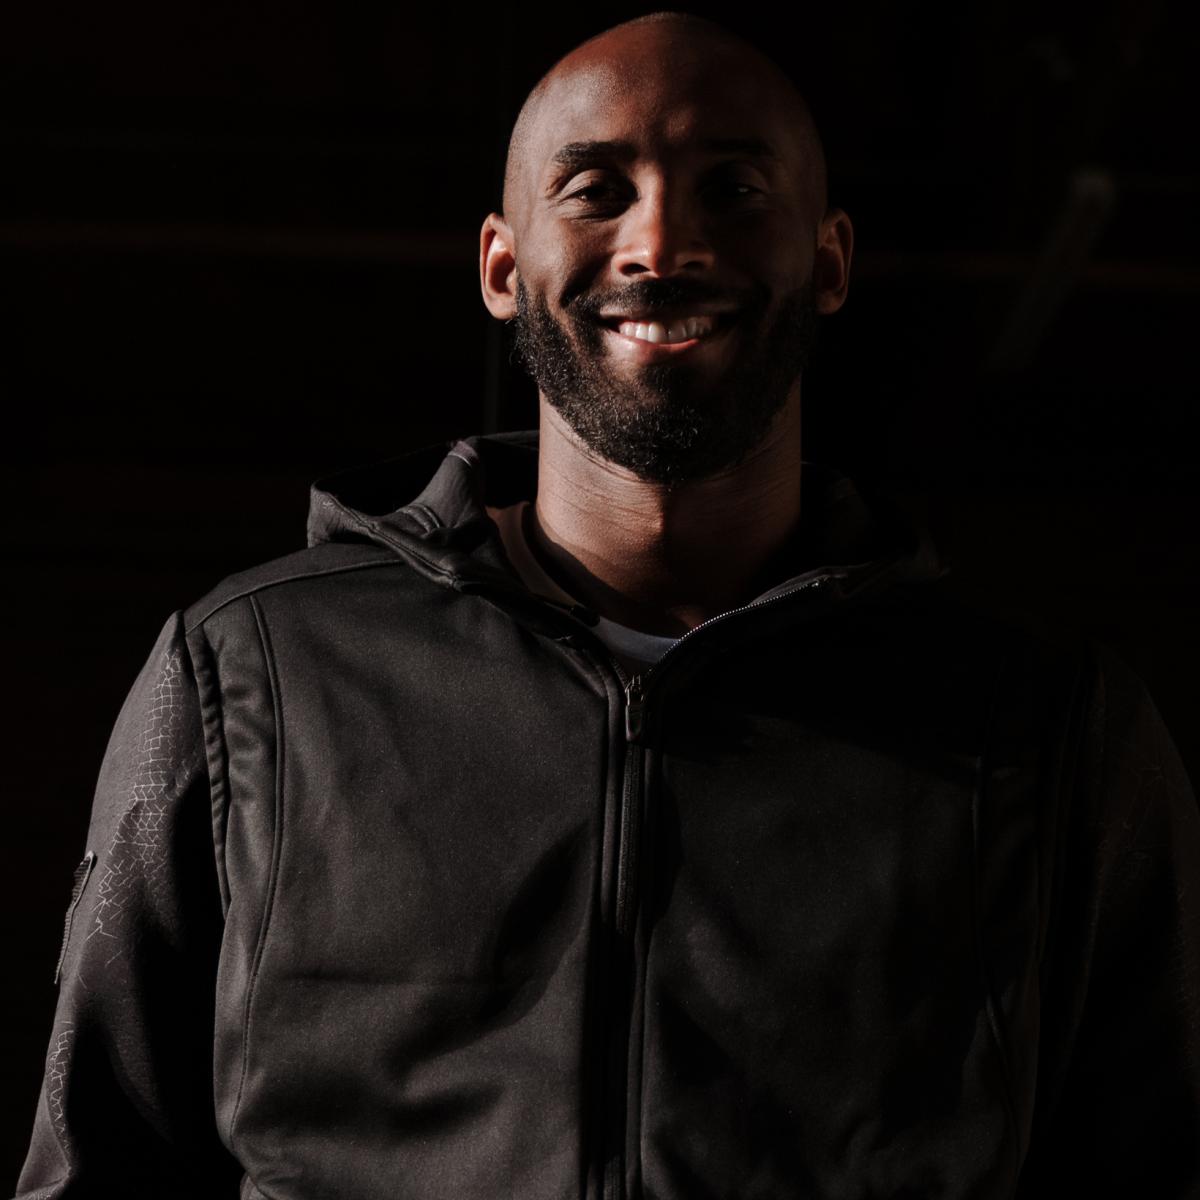 Kobe Bryant on Upcoming Election: 'You Know What Candidate I'm Supporting'